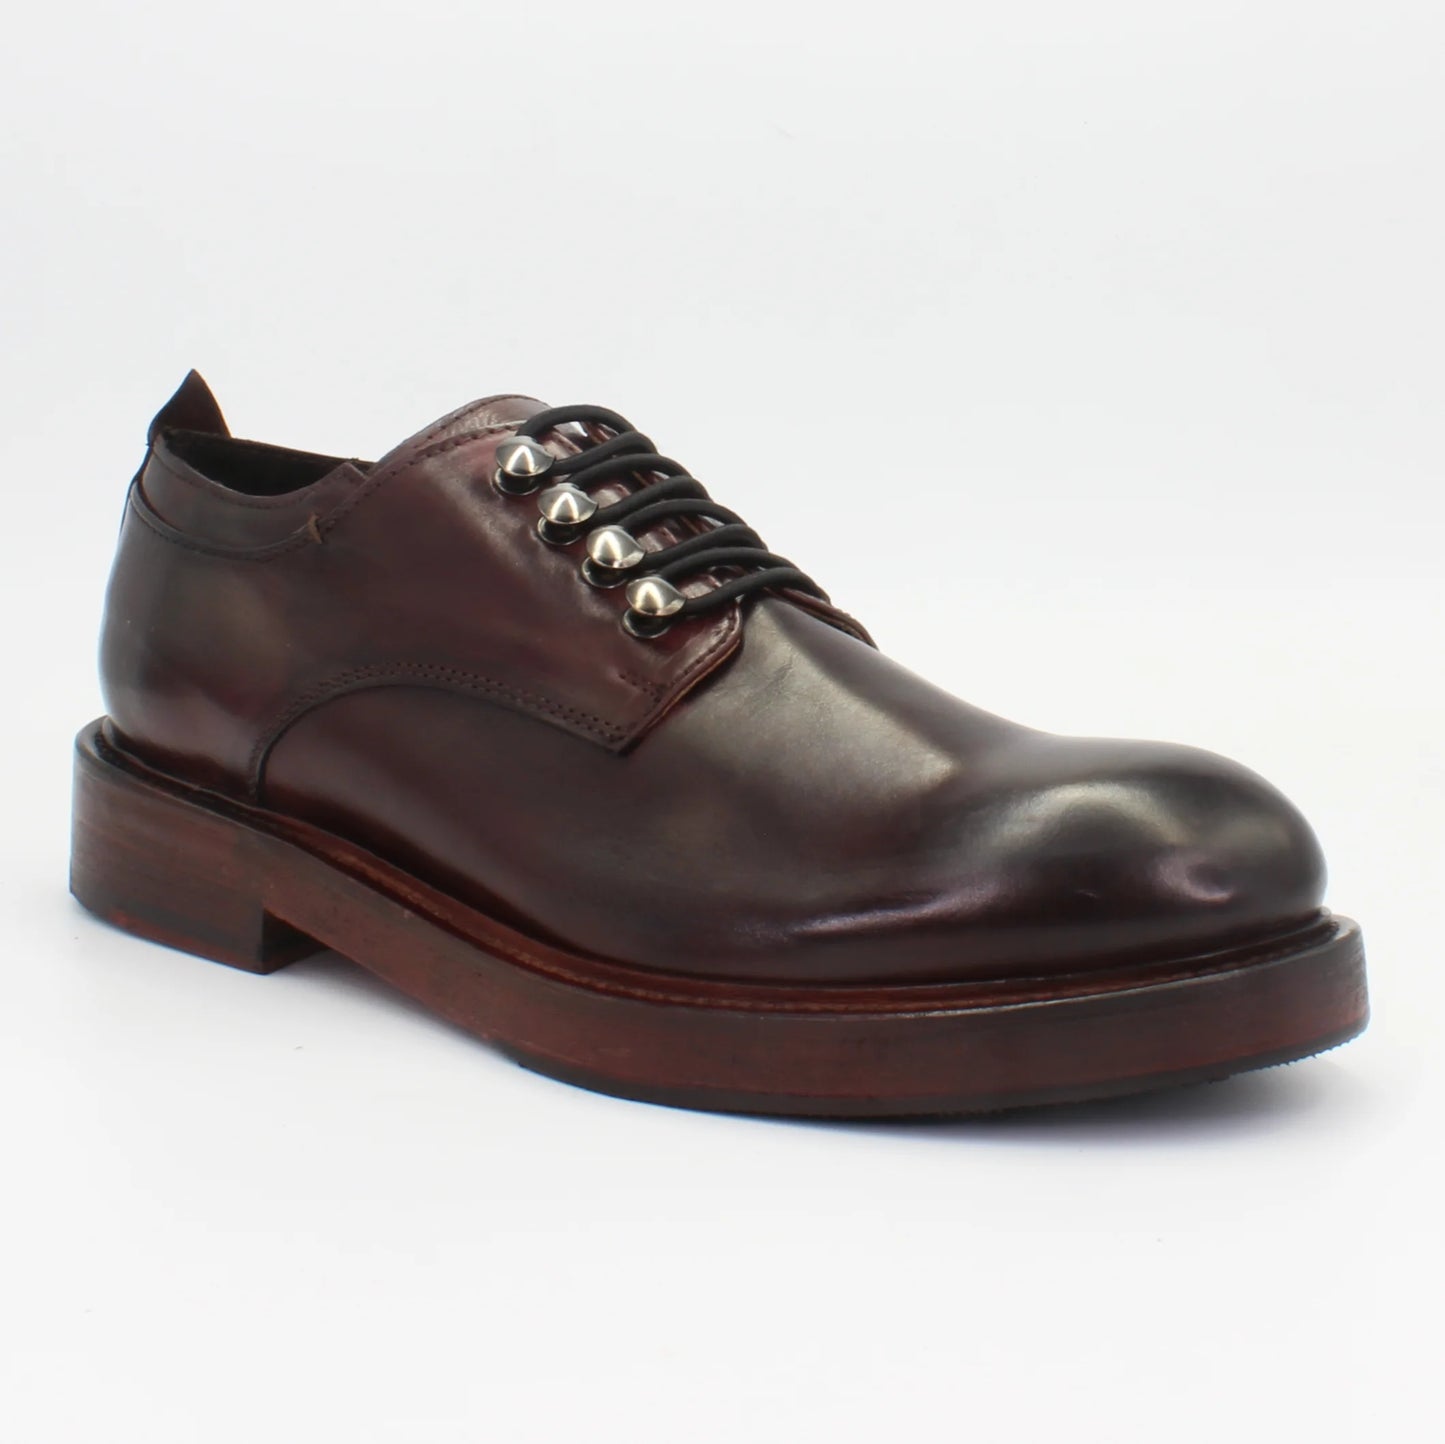 Shop Handmade Italian Leather Oxford in Cordovan (JP37907/4) or browse our range of hand-made Italian shoes for women in leather or suede in-store at Aliverti Cape Town, or shop online. We deliver in South Africa & offer multiple payment plans as well as accept multiple safe & secure payment methods.